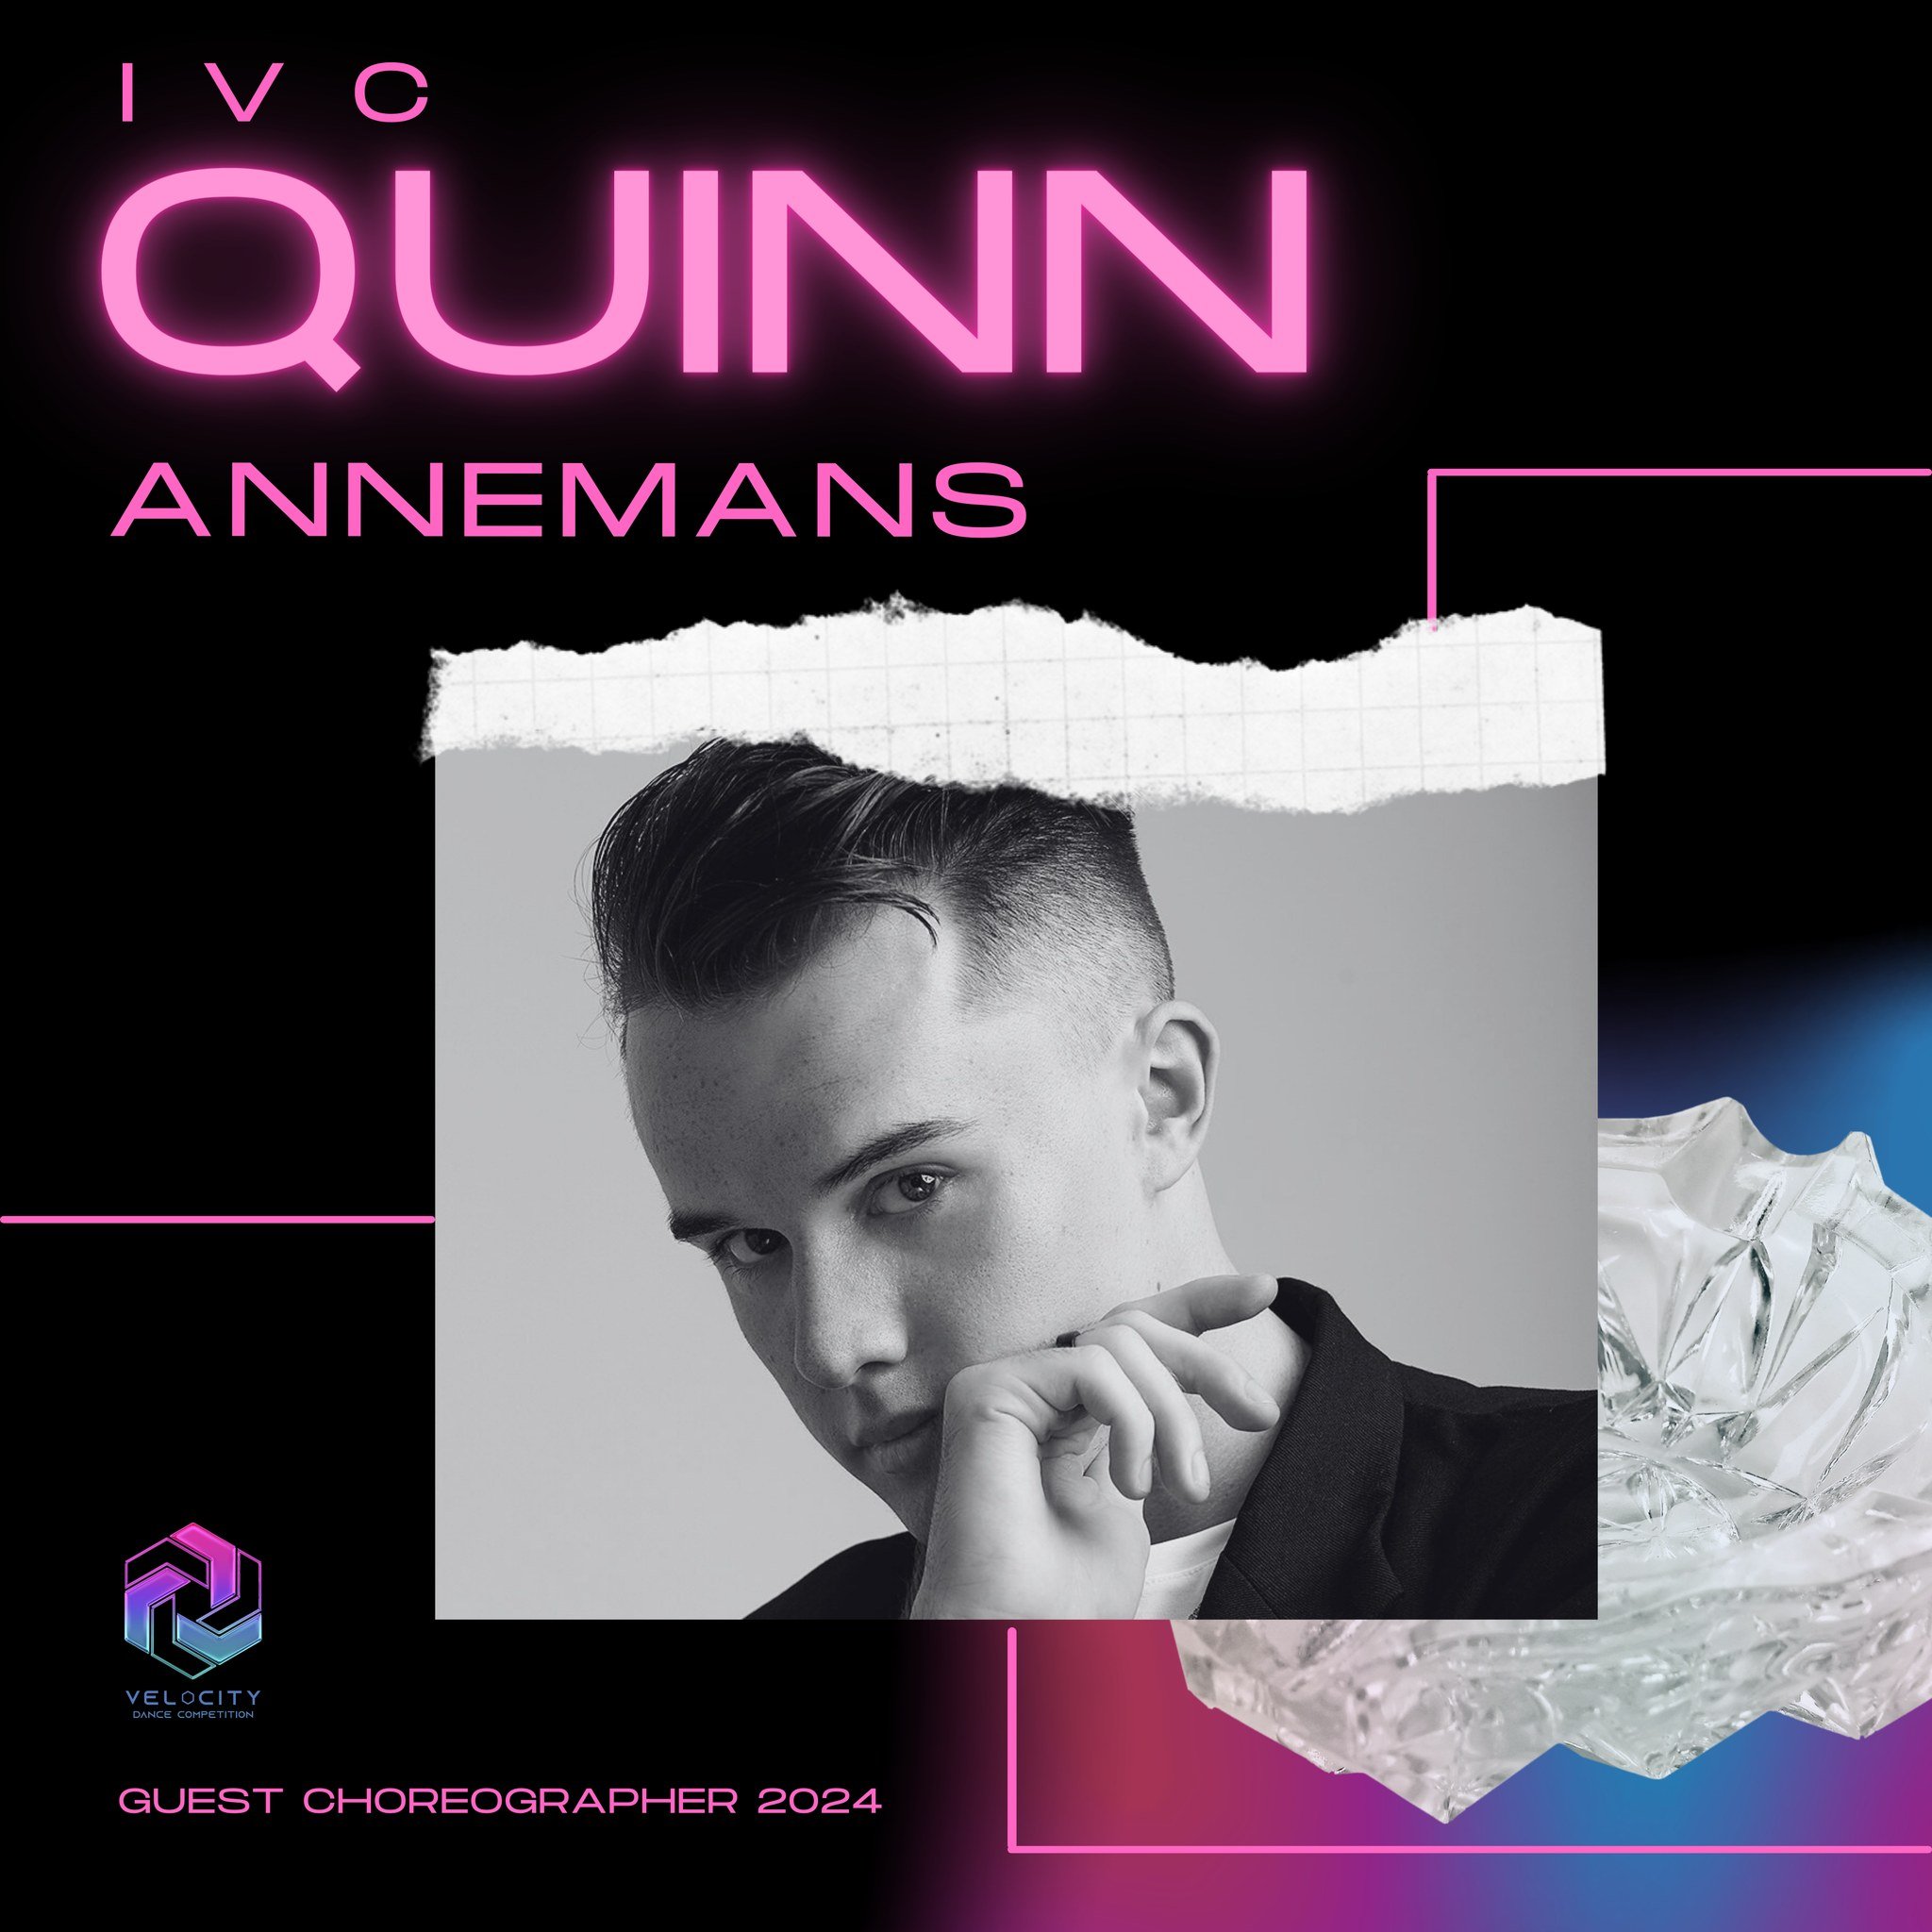 Announcing our Guest Choreographer for the 2024 IVC Regional! 

We have the VDC Director himself: Quinn Annemans! @quinnannemans

Quinn Annemans has established himself as a respected and versatile dancer, performer and choreographer. With Quinn&rsqu